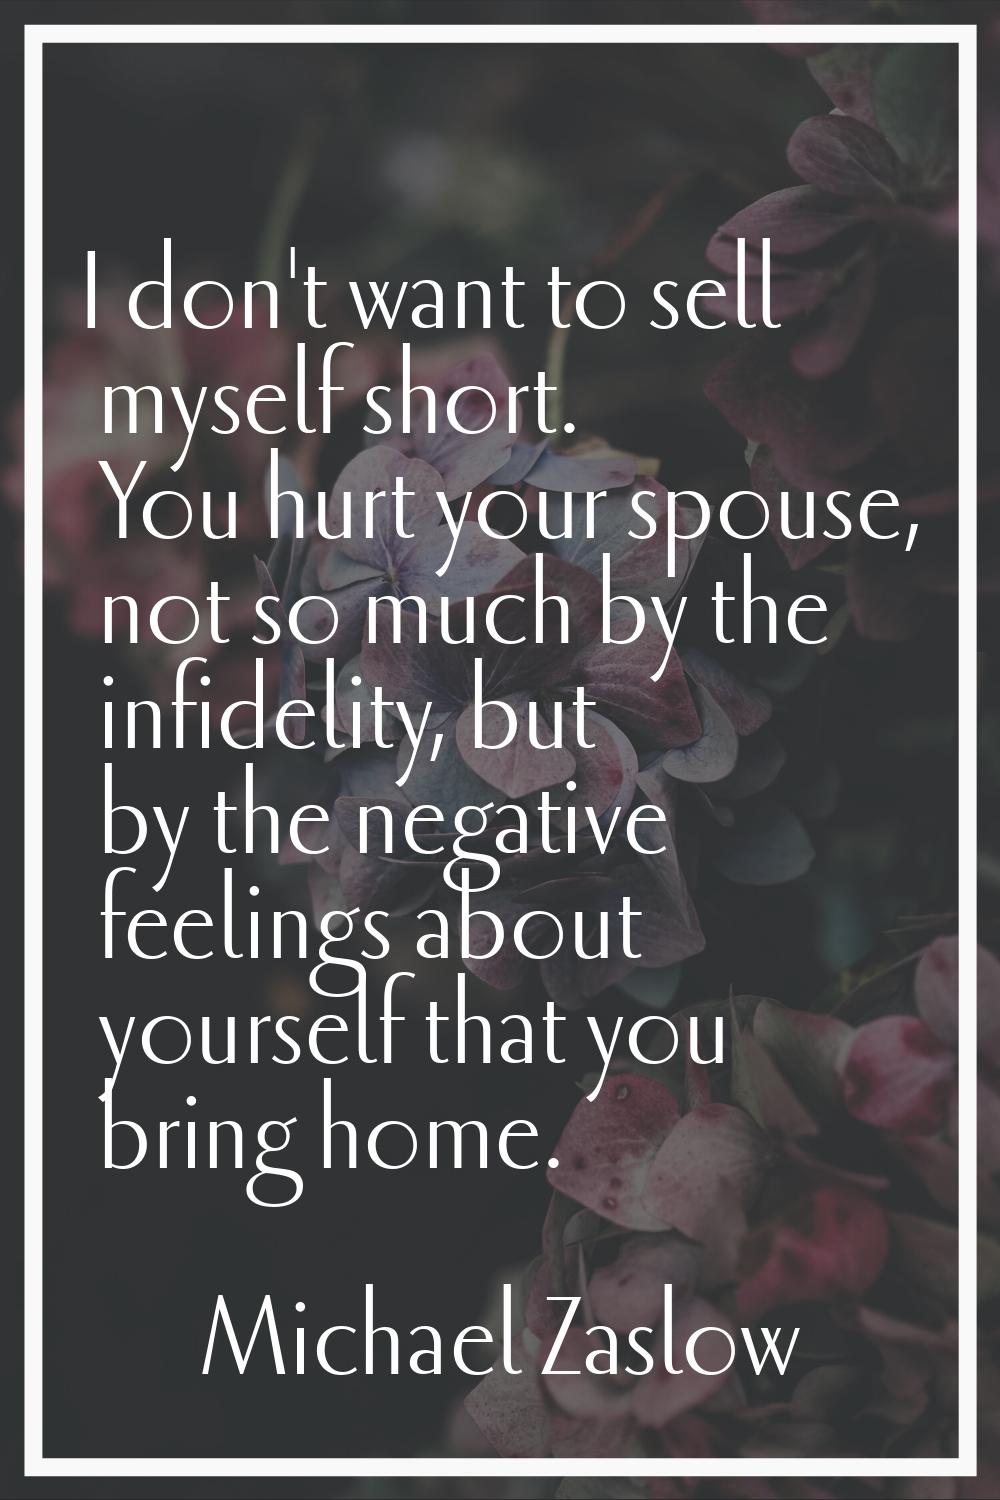 I don't want to sell myself short. You hurt your spouse, not so much by the infidelity, but by the 